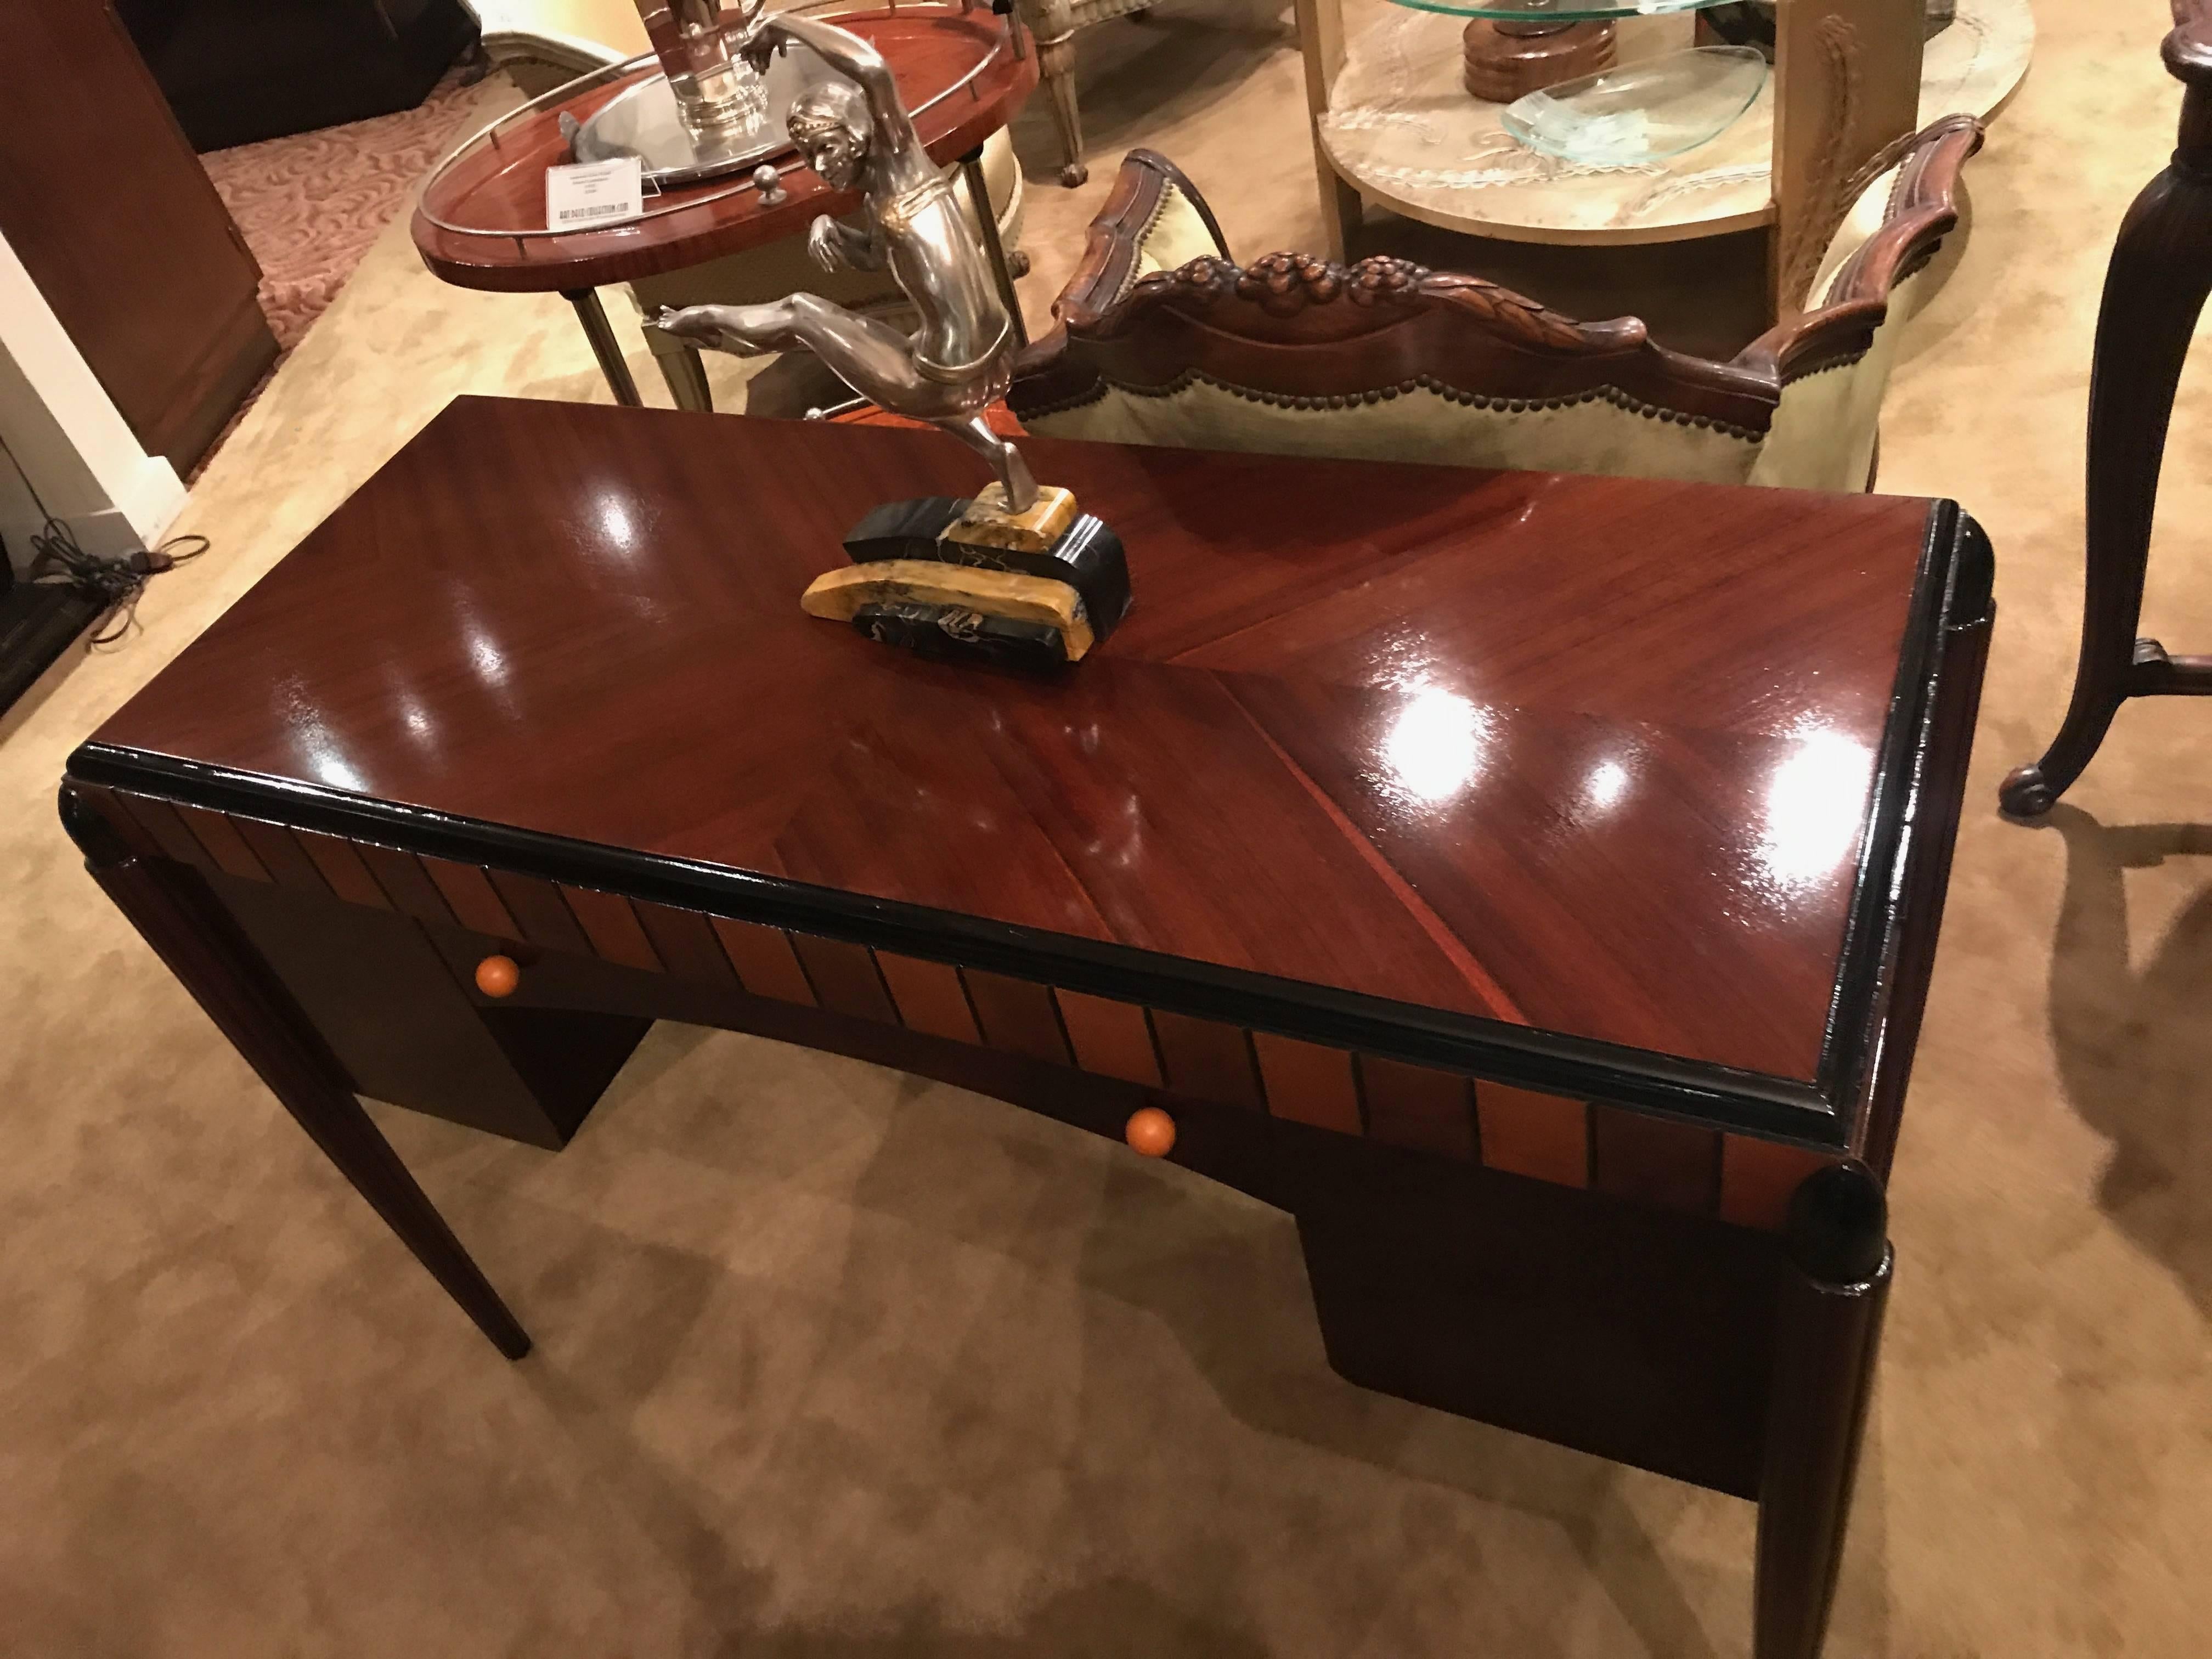 If you were every looking for a highly stylized French Art Deco writing table, I think this may be one of the nicest original pieces I've seen in a long time. The size is wonderful and very useful as a desk, writing table, reception table or small